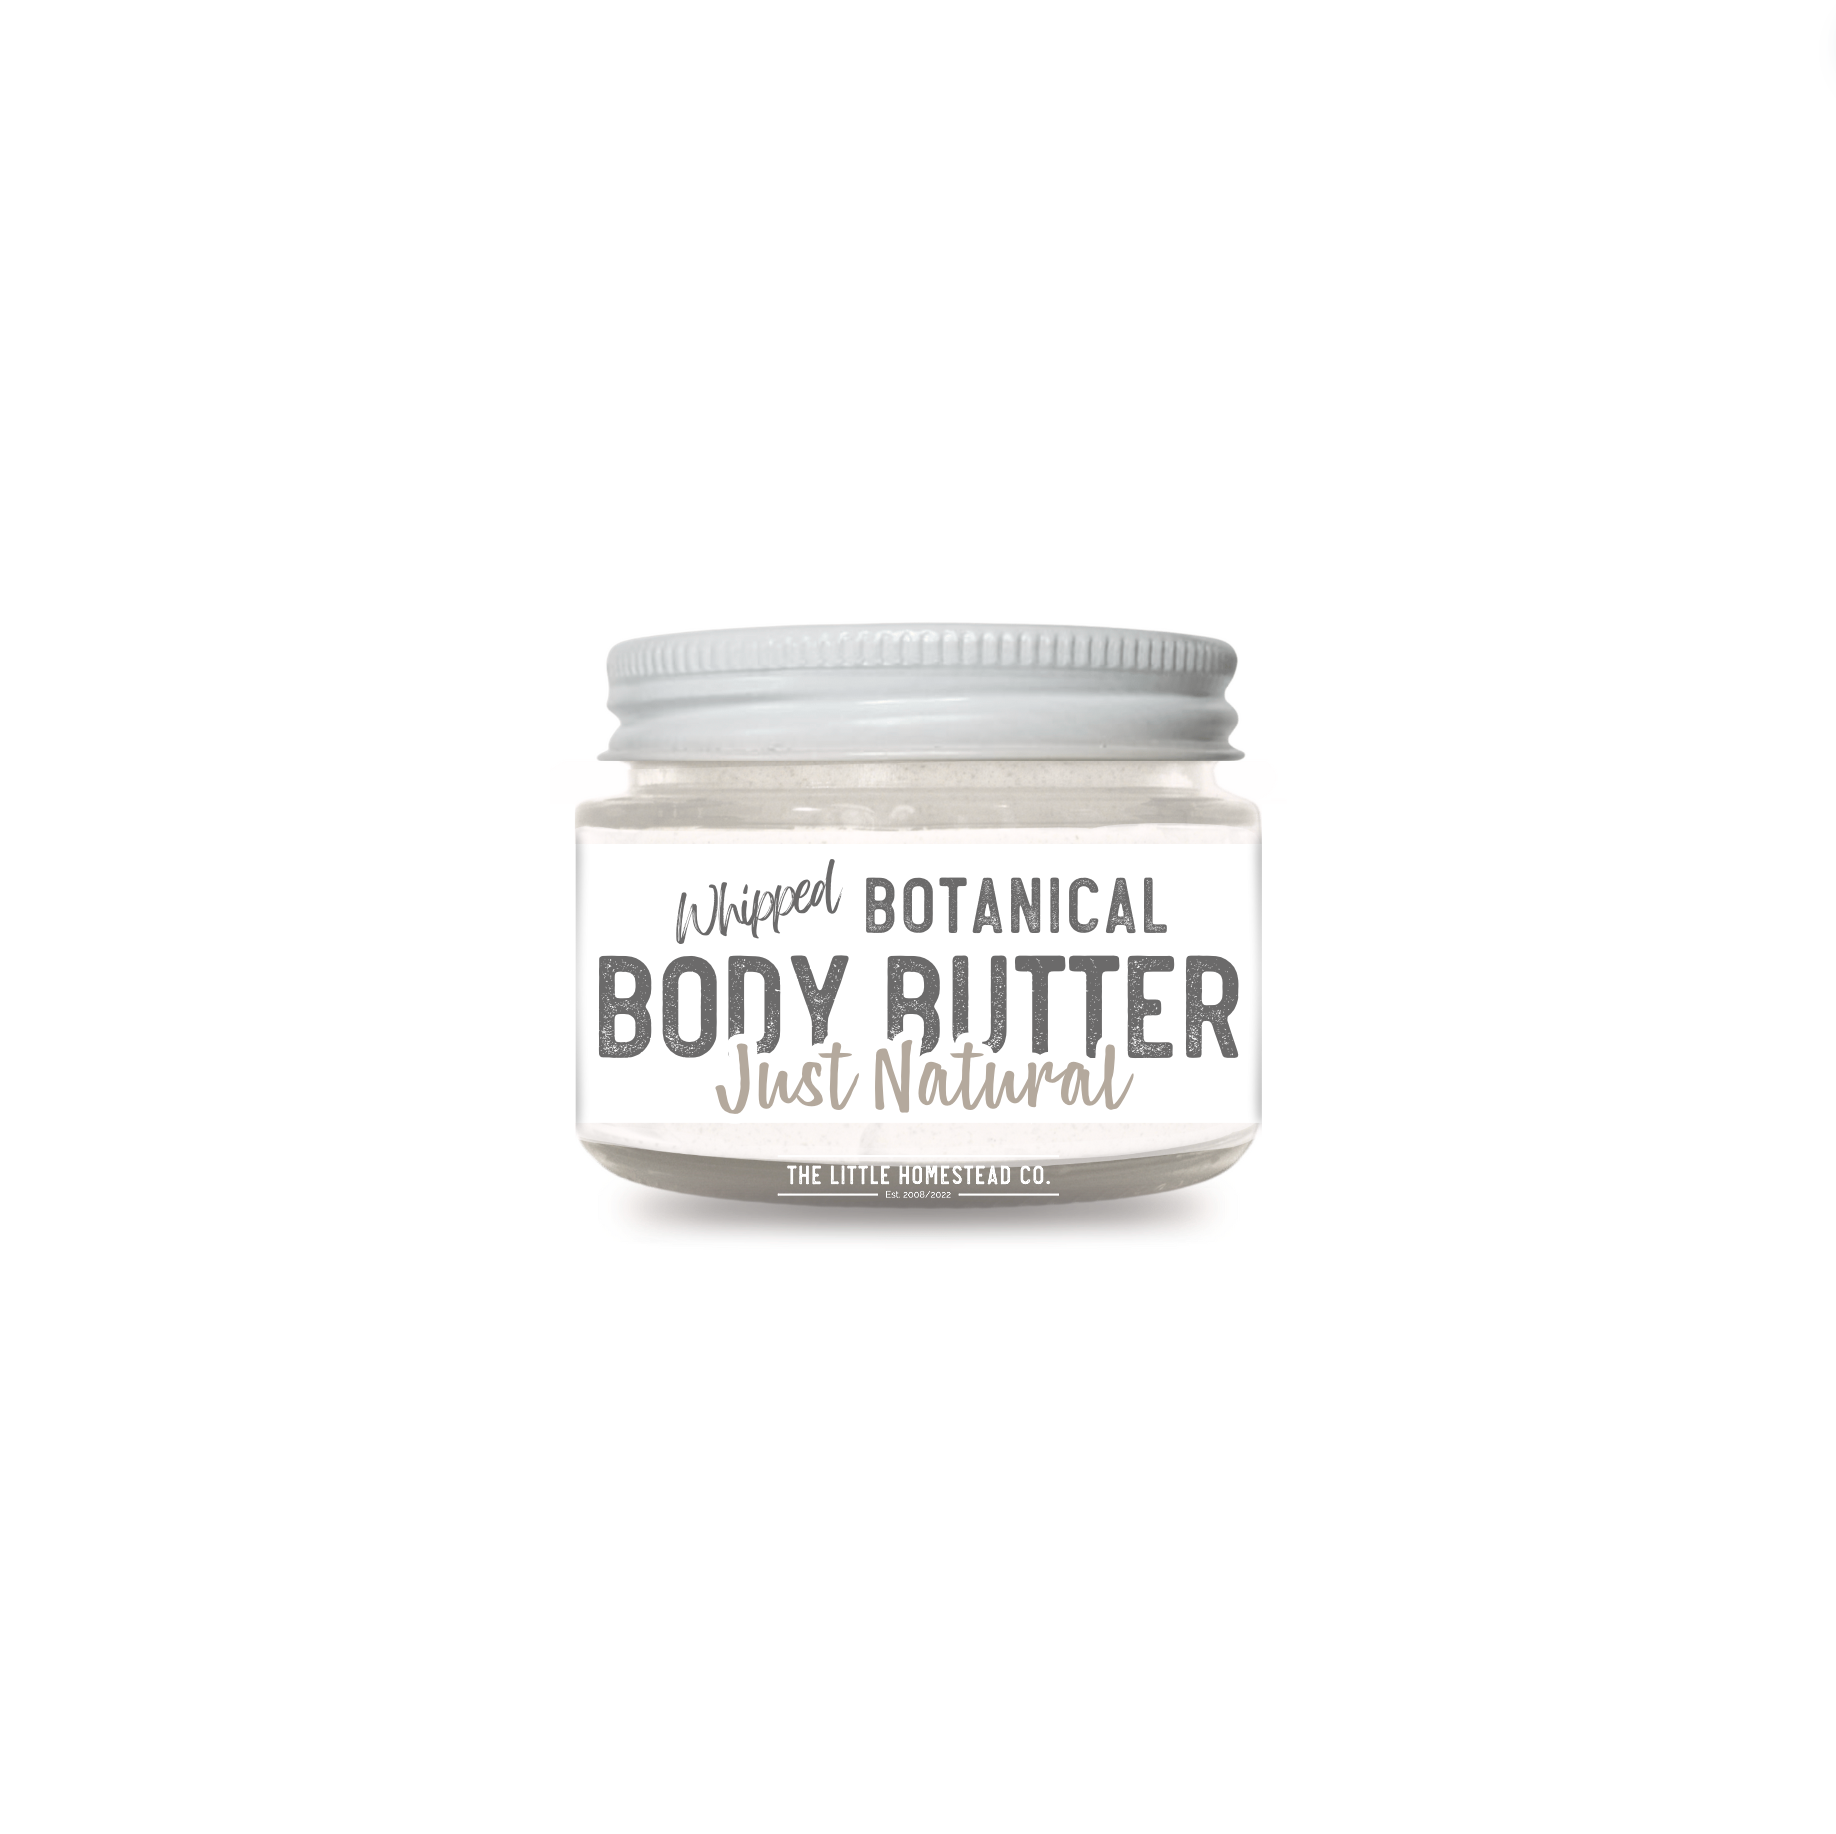 Body Butter: Just Natural